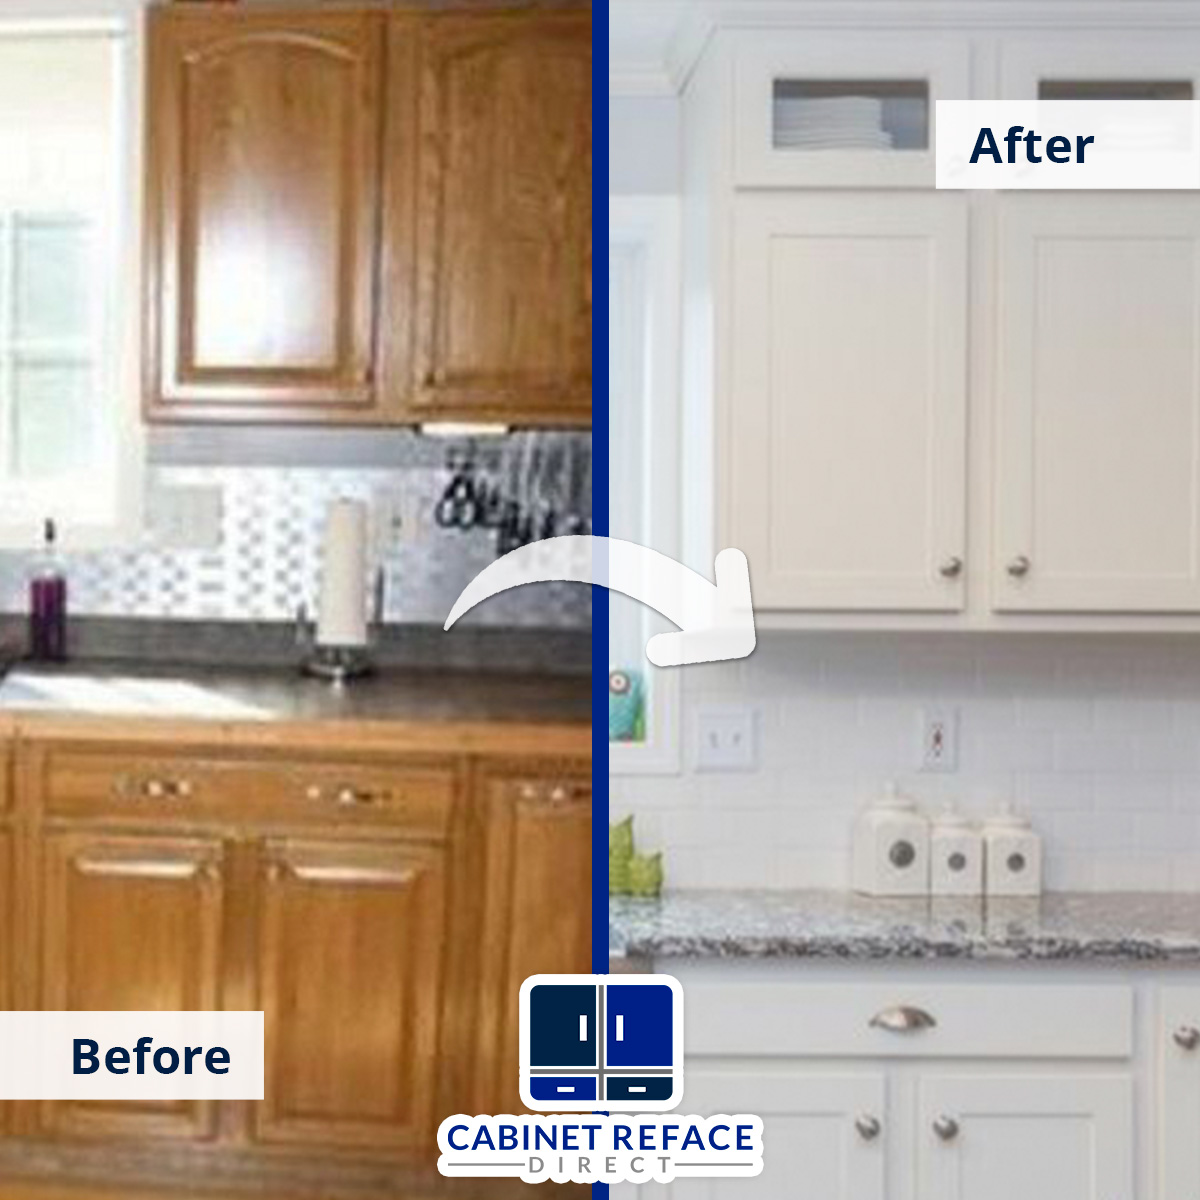 Mind-Blowing Kitchen Cabinet Refacing Before and After Results in